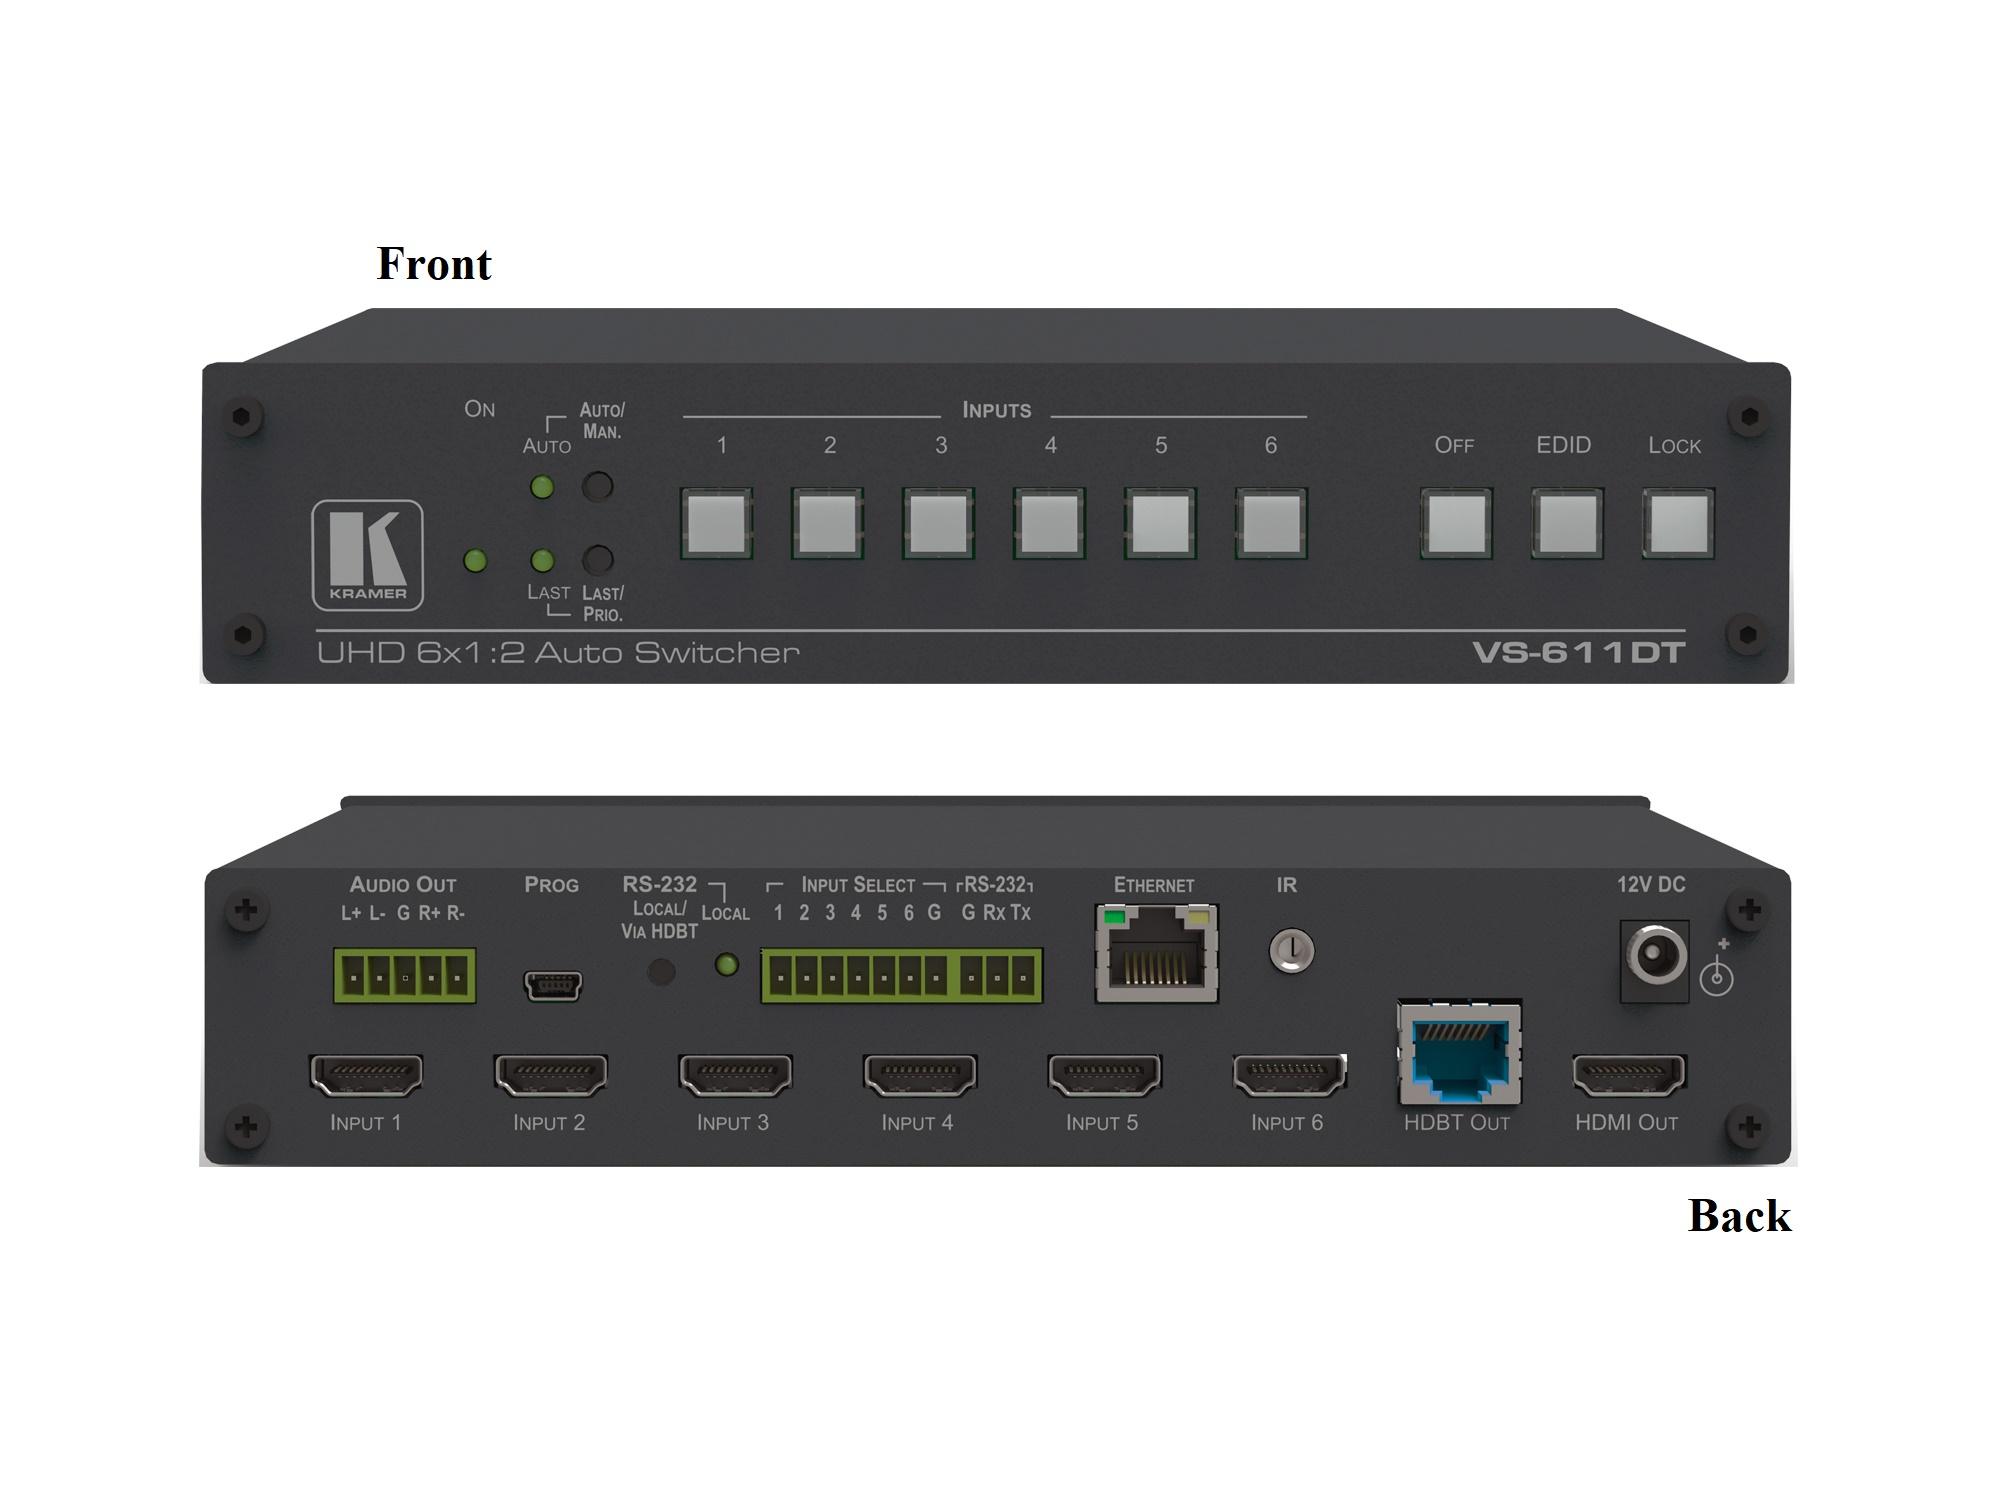 VS-611DT 6x1/2 4K60 4x2x0 HDBaseT Extended Reach PoE Auto Switching HDMI Switch by Kramer